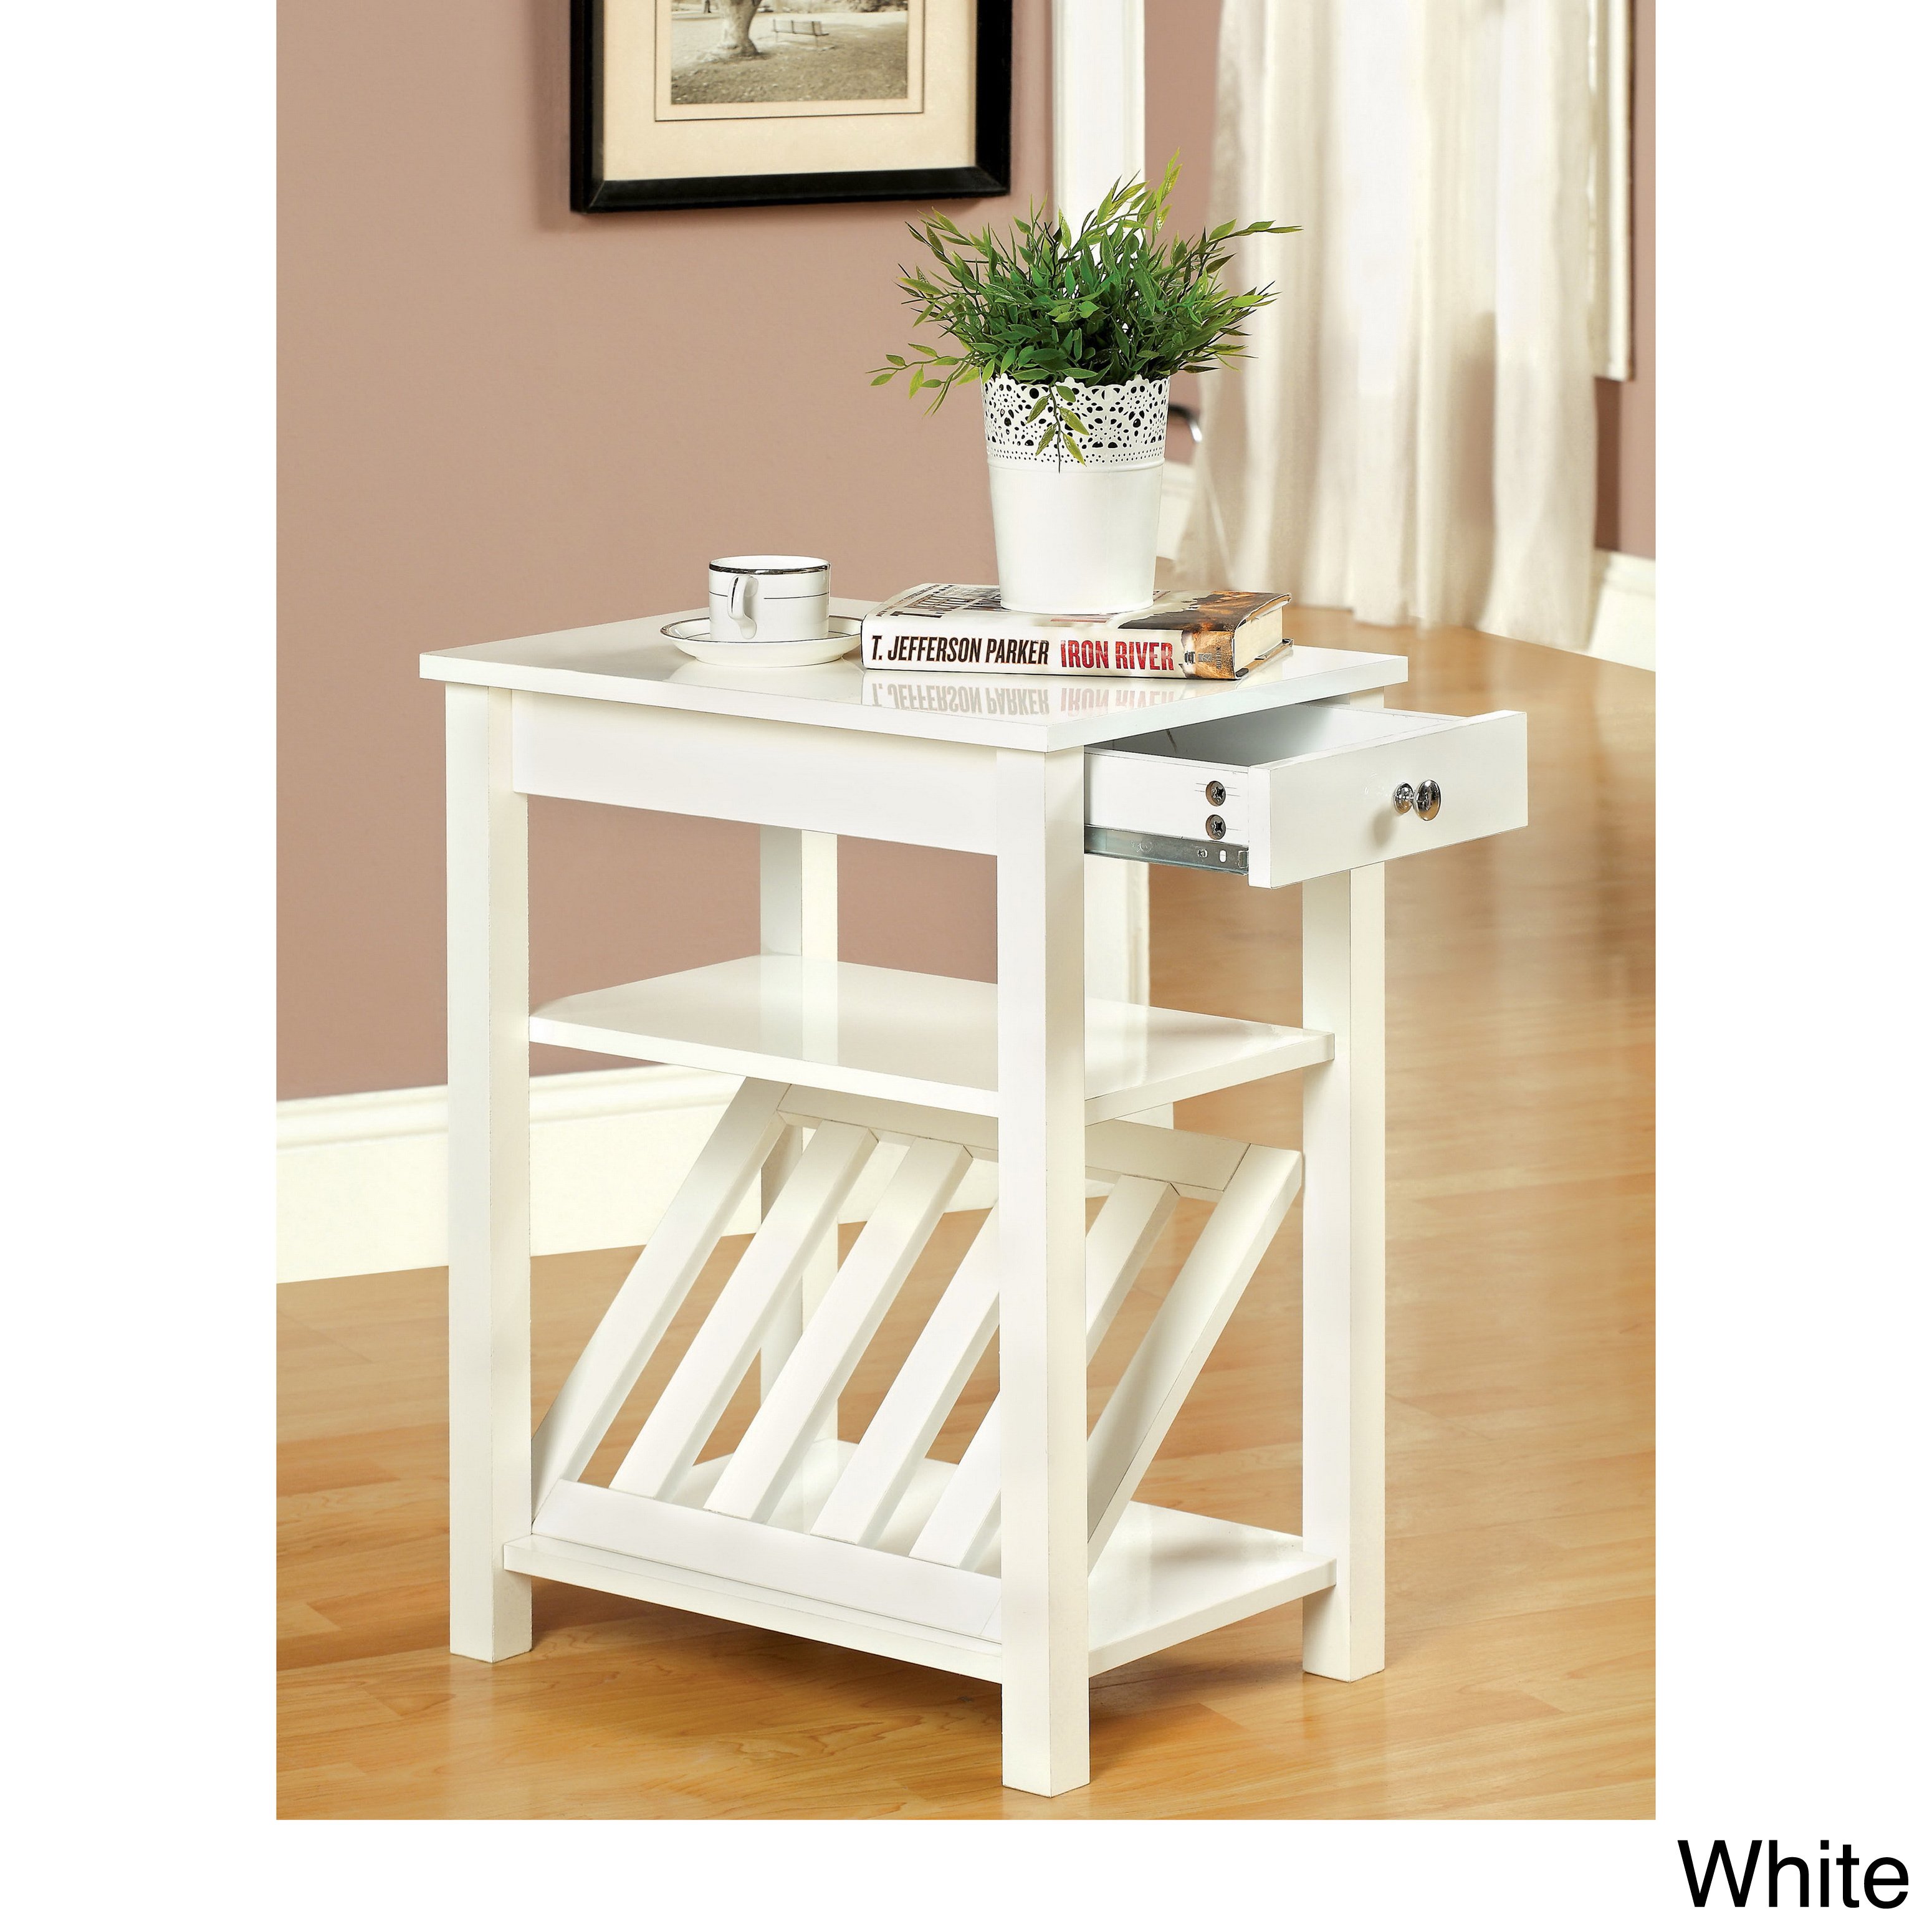 furniture america corin accent table with storage drawer and white magazine rack holder free shipping today target round chairs building sliding barn door small black end patio